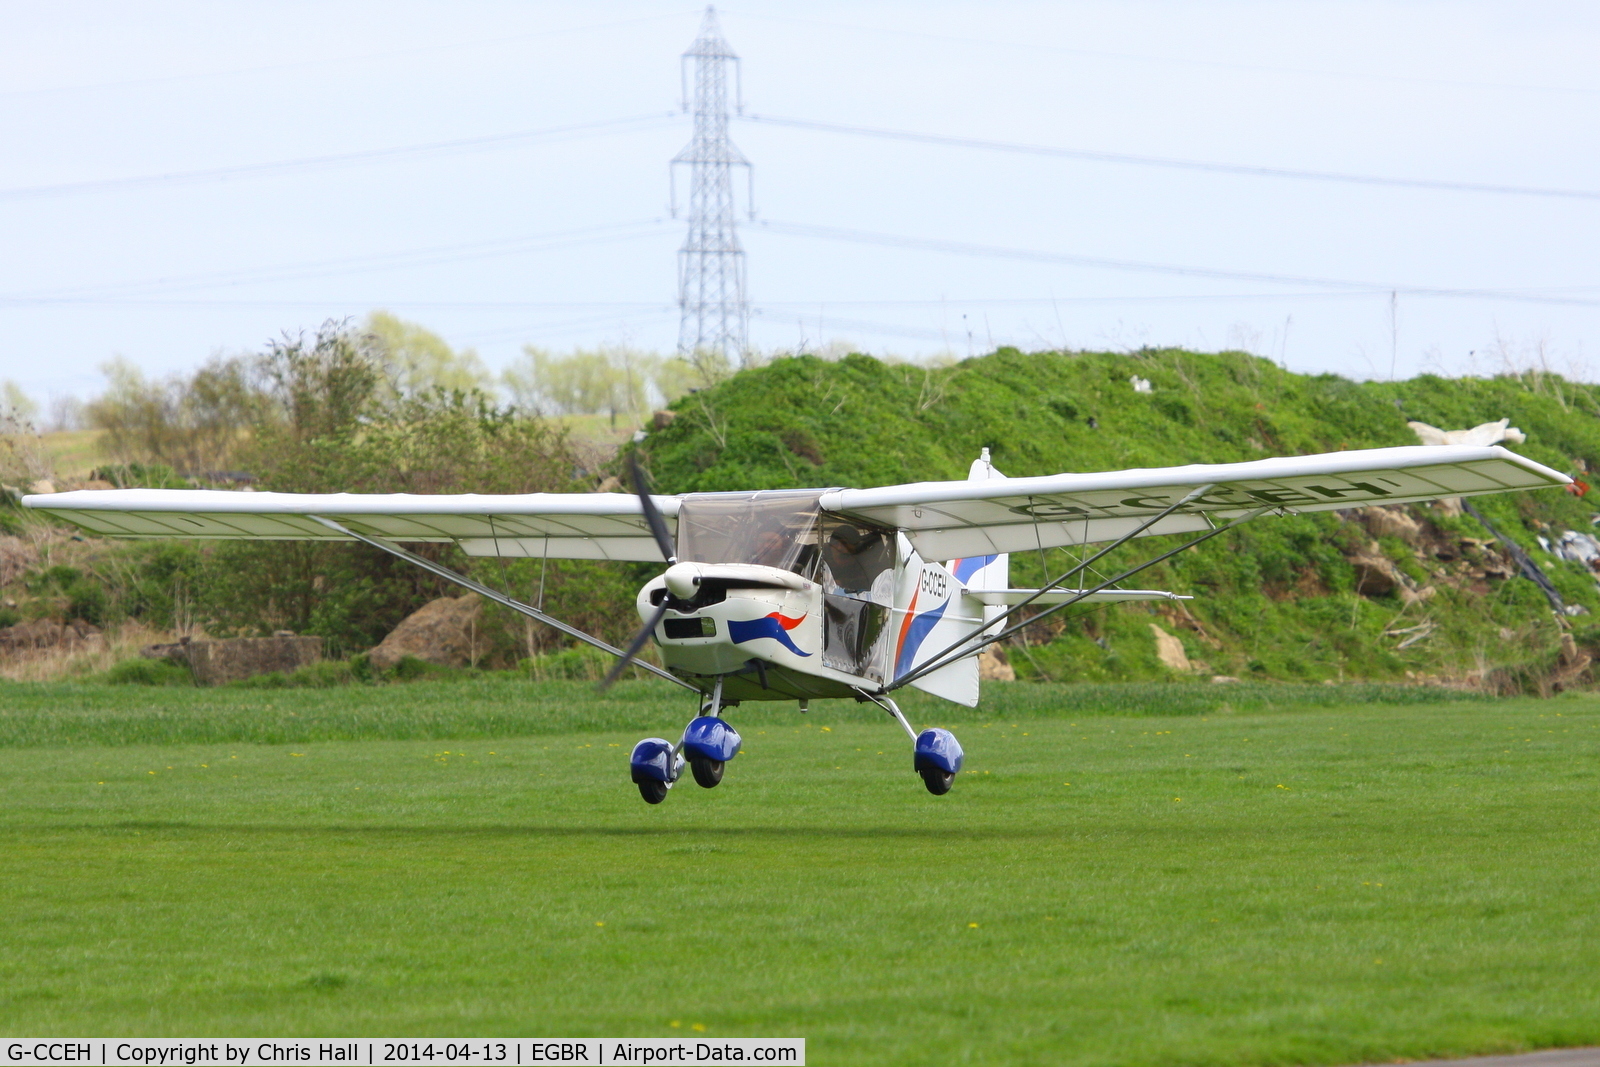 G-CCEH, 2003 Best Off Skyranger 912(2) C/N BMAA/HB/267, at Breighton's 'Early Bird' Fly-in 13/04/14